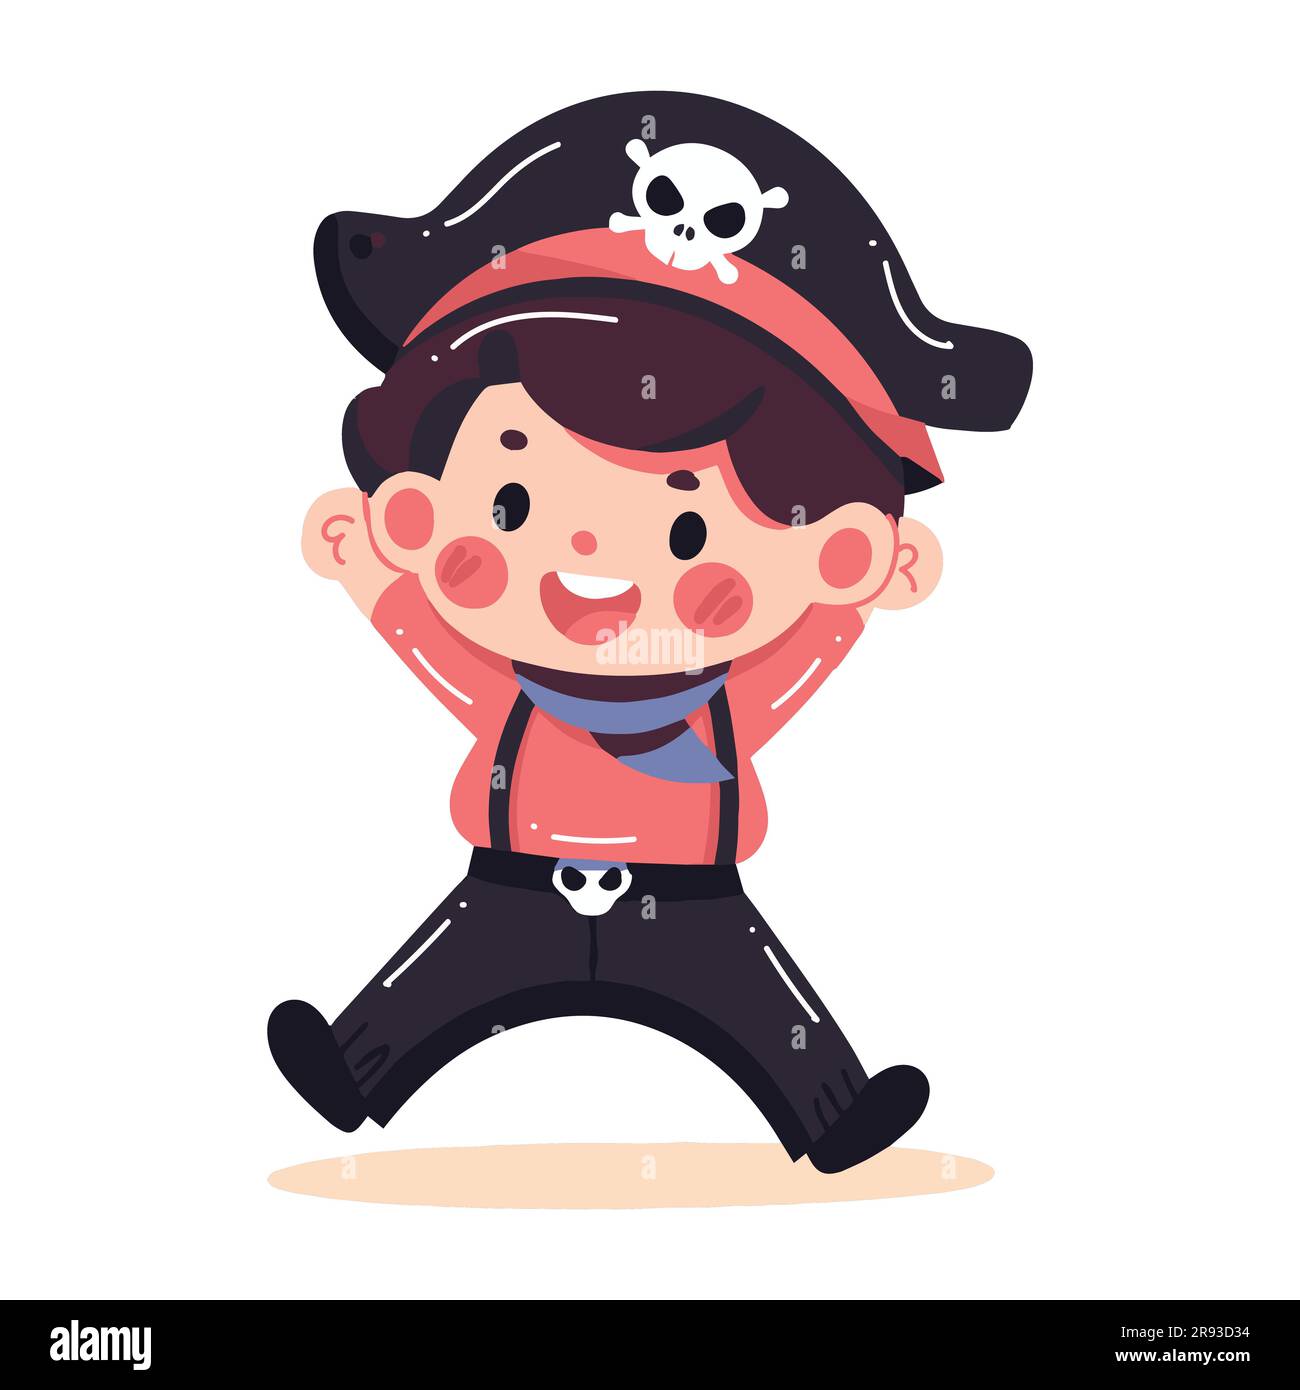 Pirate hook hand Cut Out Stock Images & Pictures - Page 3 - Alamy